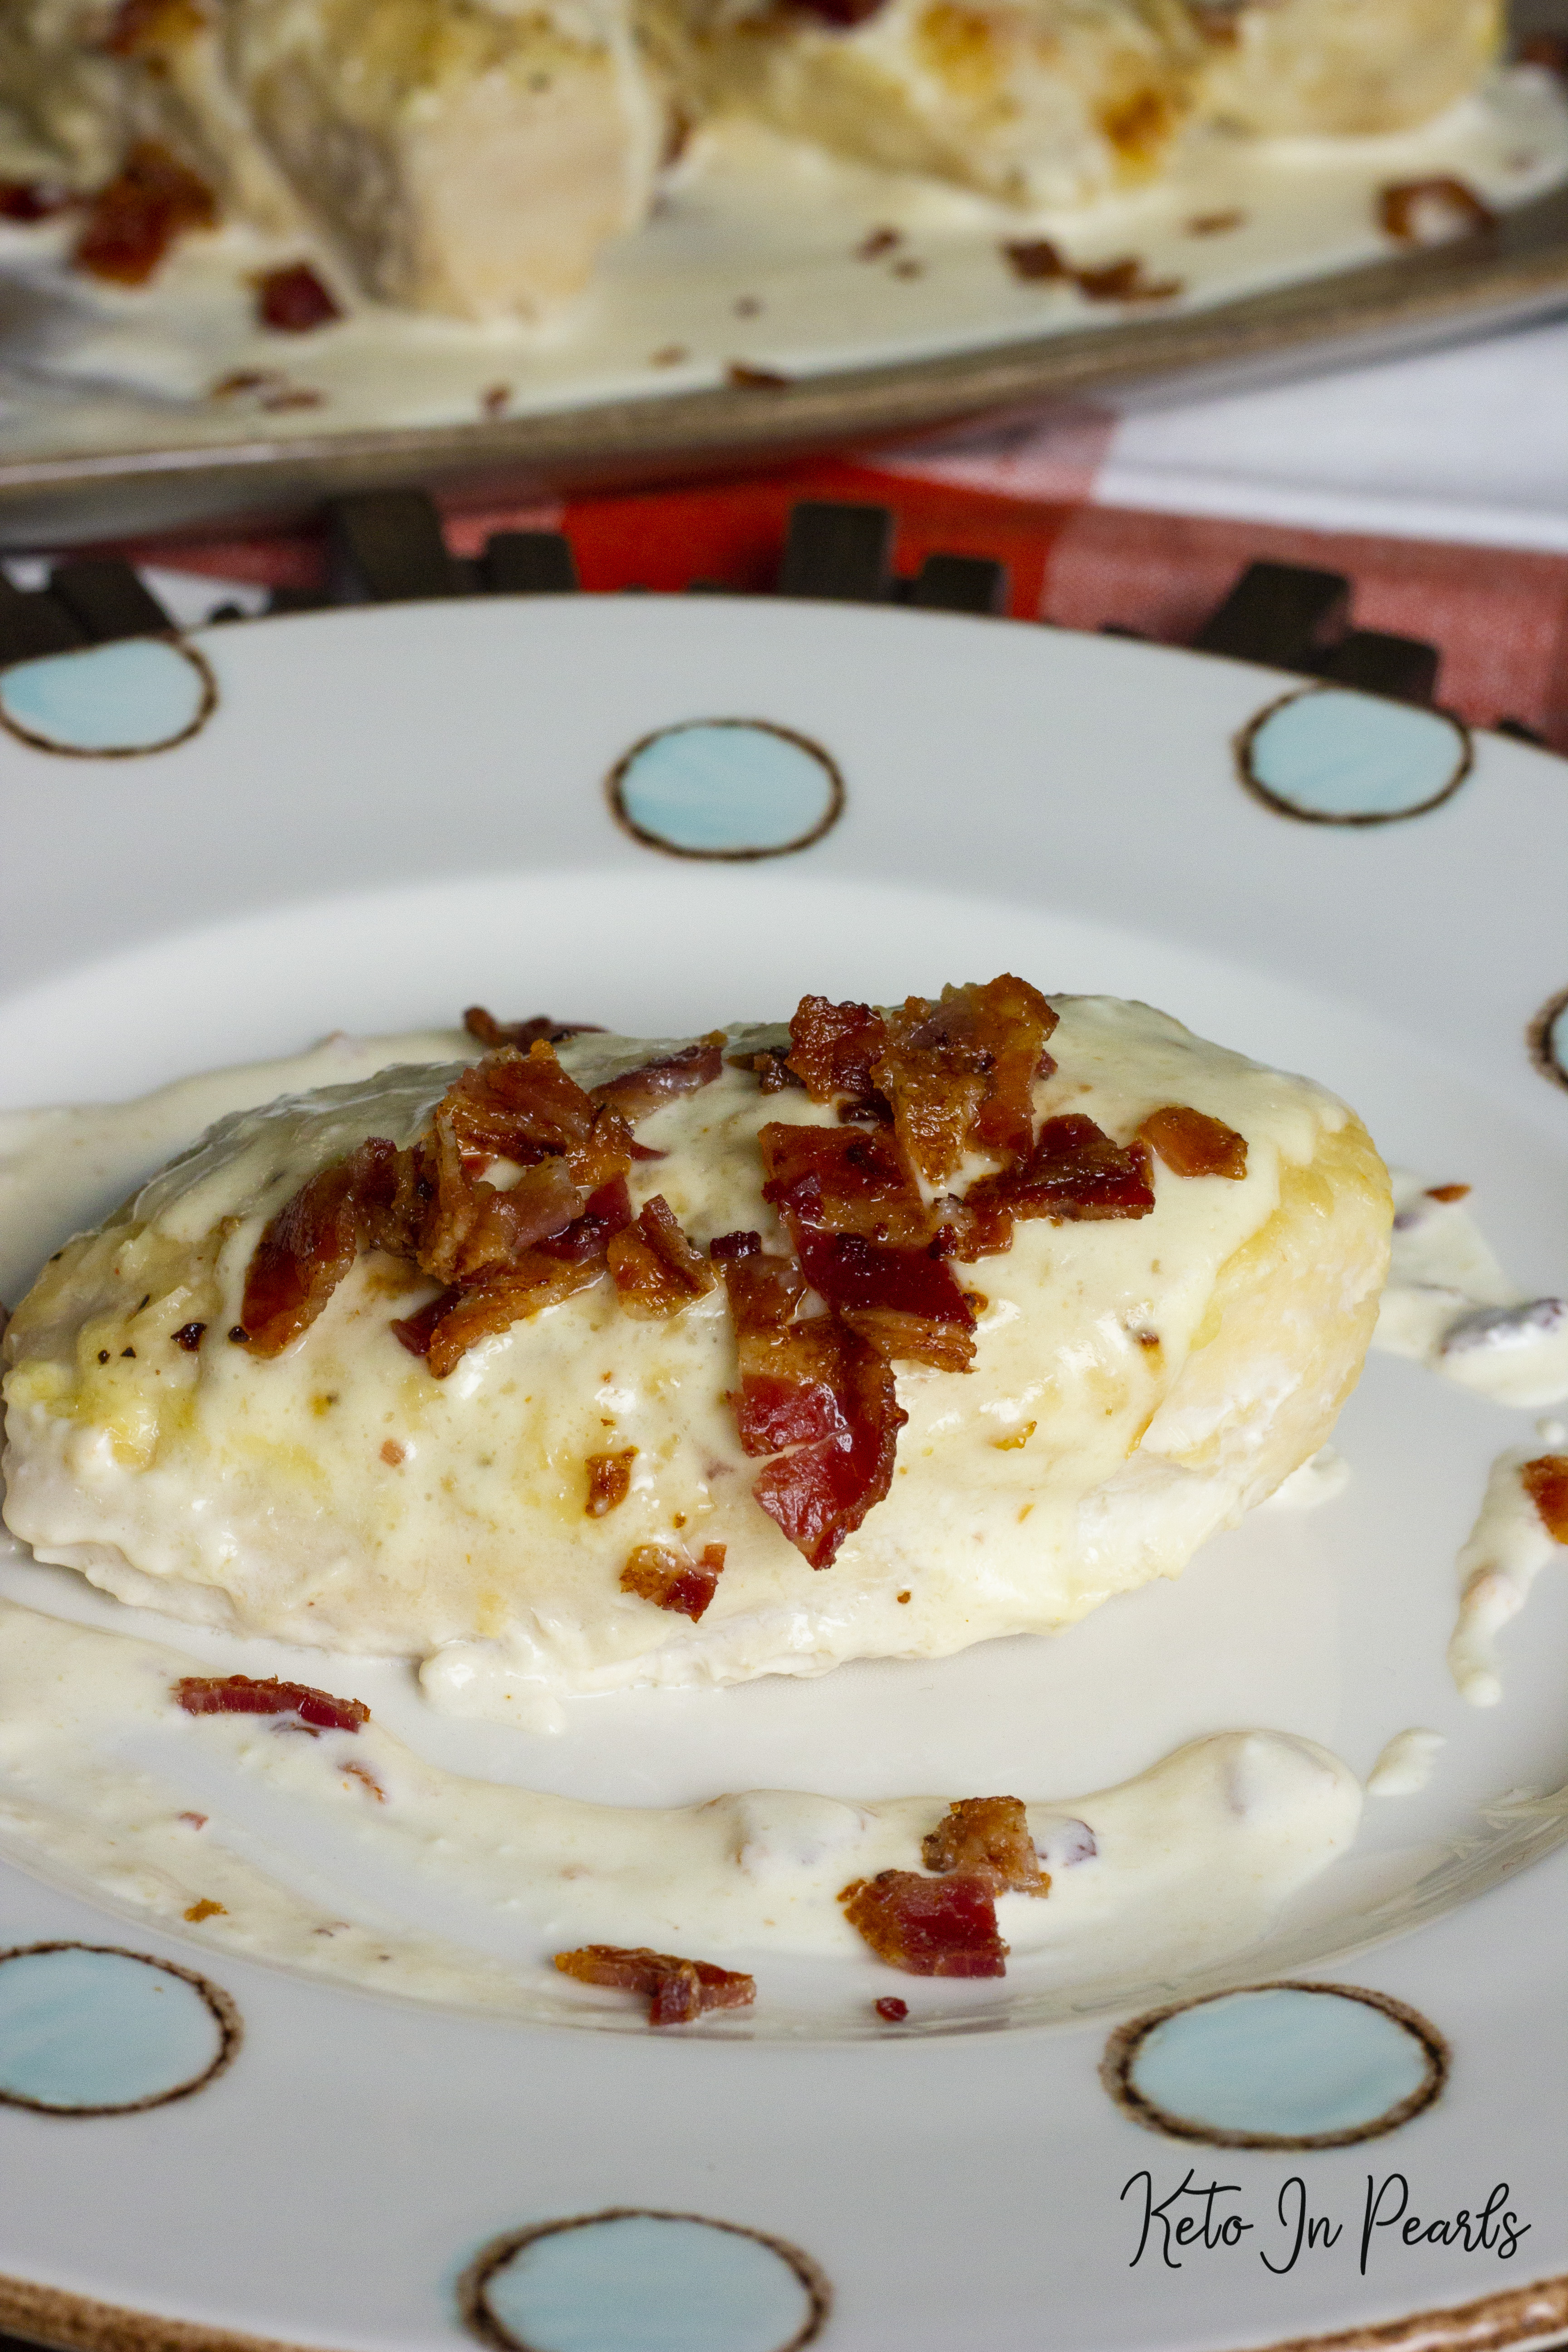 This recipe for keto chicken with bacon cream sauce is the most popular recipe on my blog. See what all the fuss is about with this amazing keto recipe!